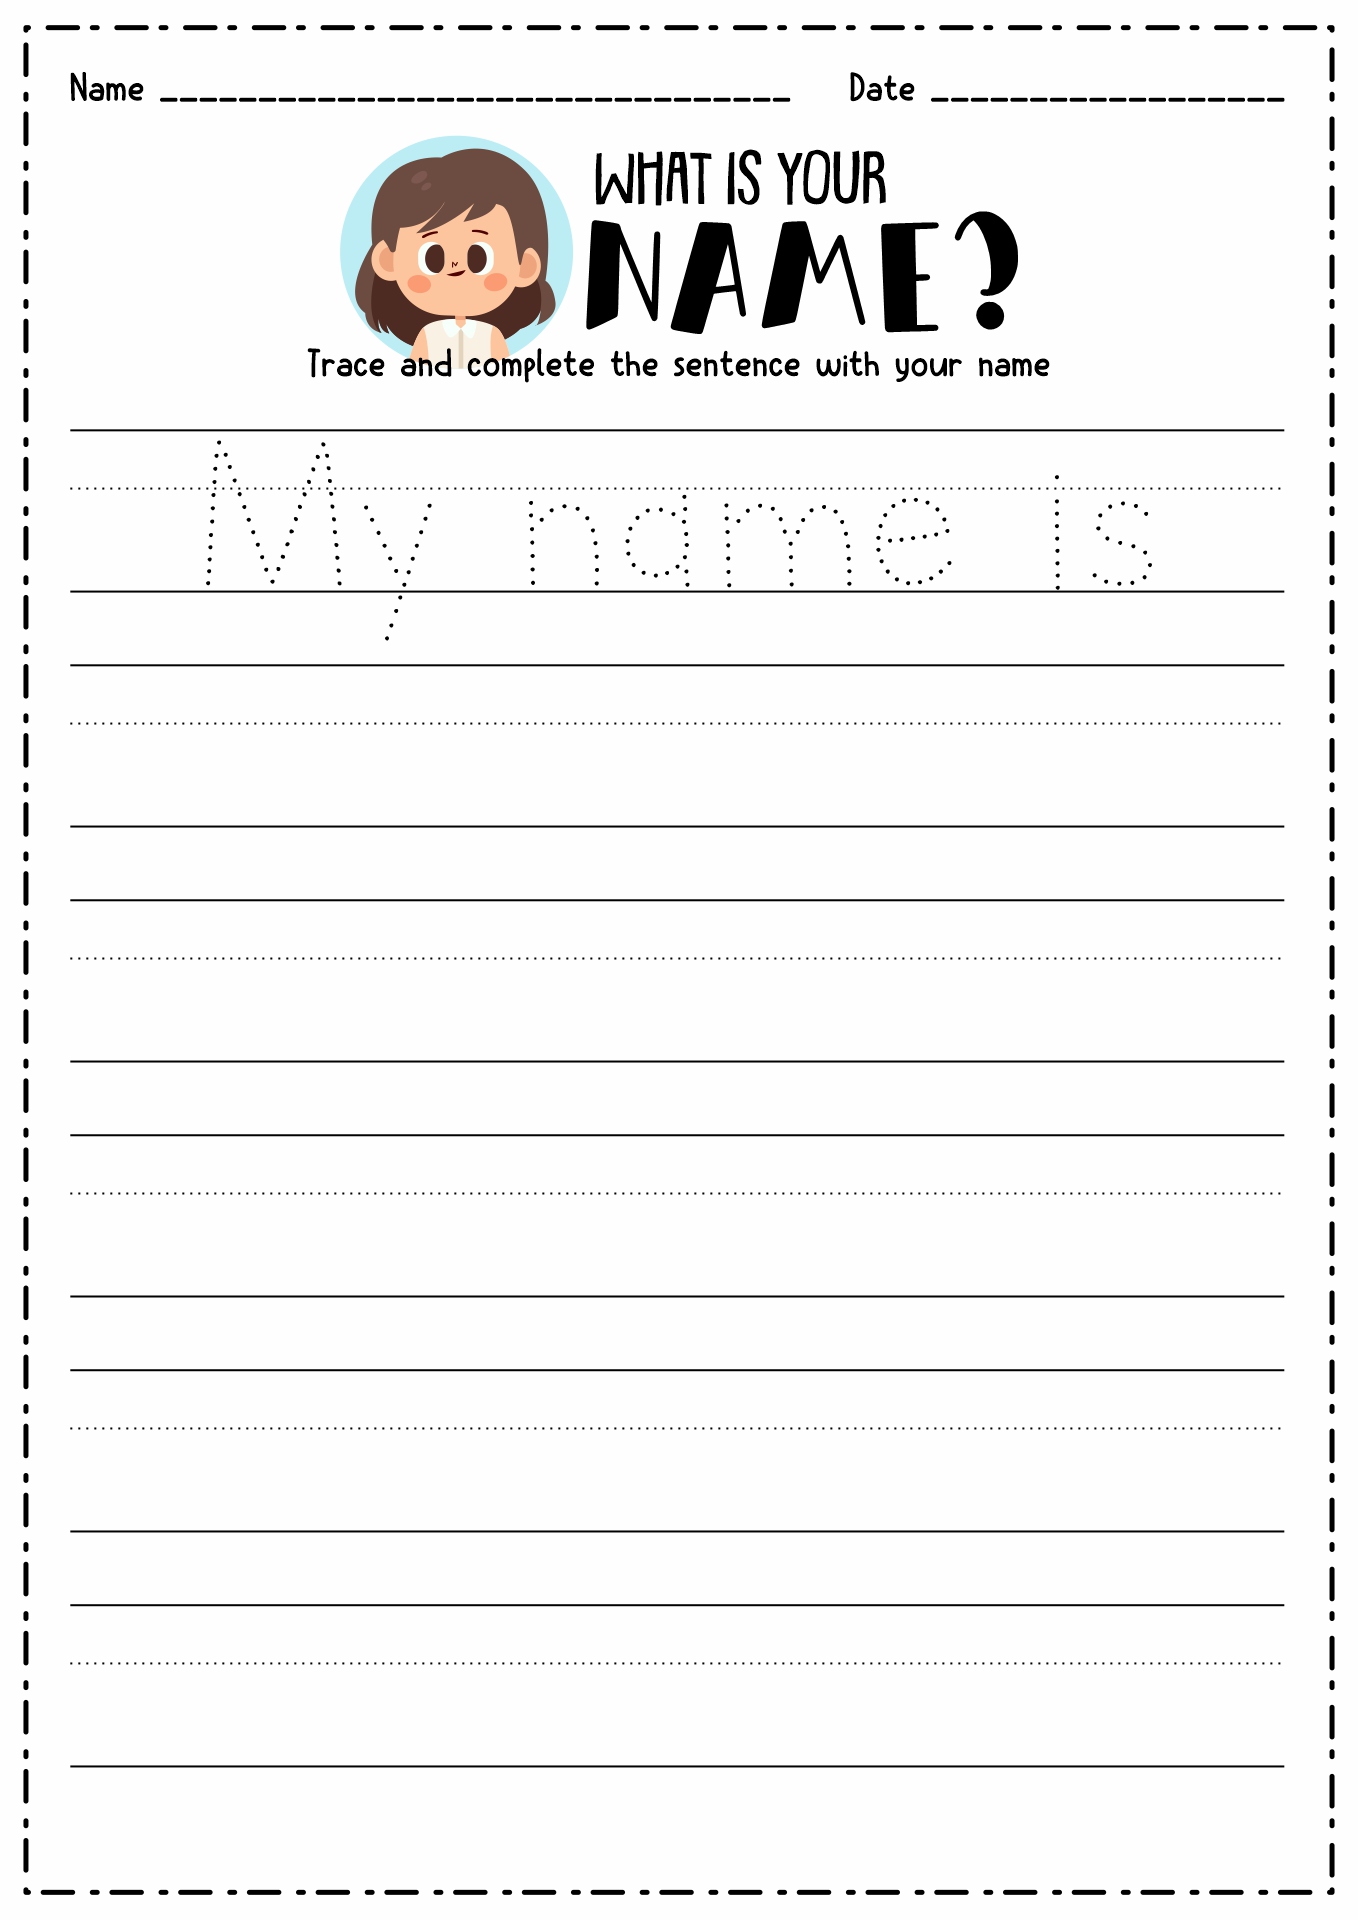 dot-letters-for-tracing-names-tracinglettersworksheets